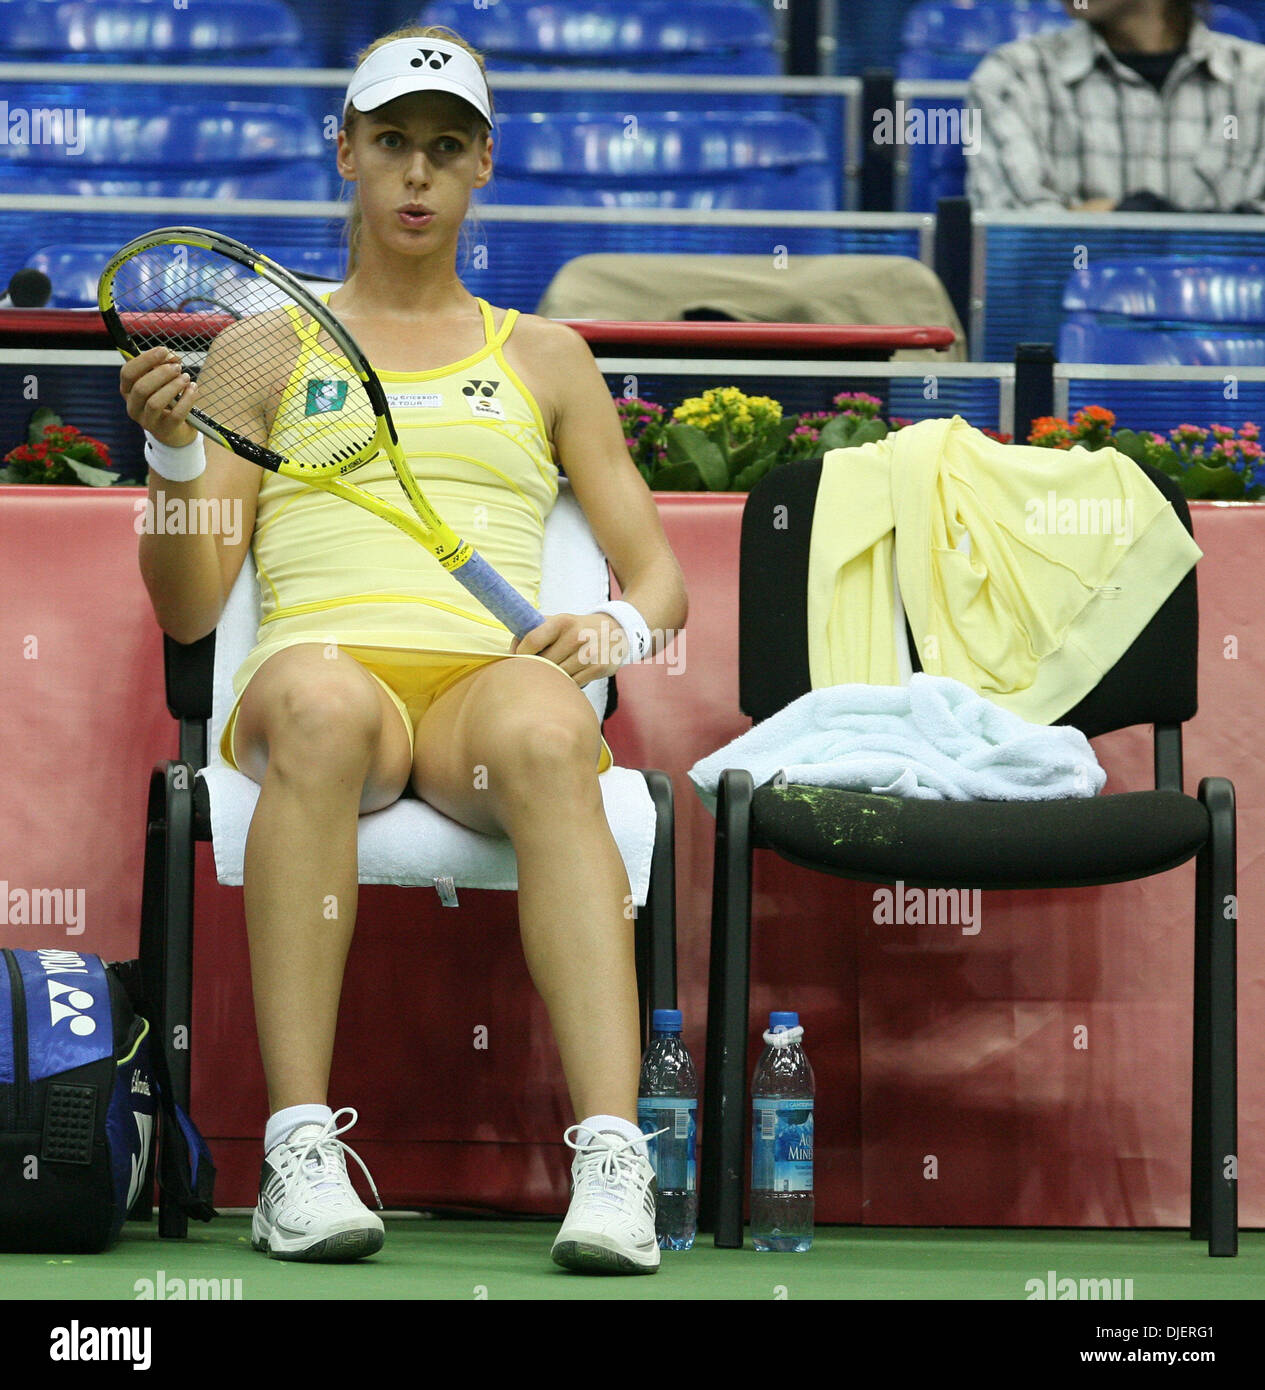 Oct 09, 2007 - Moscow, Russia - Russian tennis player ELENA DEMENTIEVA during the 2007 Kremlin Cup tennis tournament in Moscow. (Credit Image: © PhotoXpress/ZUMA Press) RESTRICTIONS: North and South America RIGHTS ONLY! Stock Photo